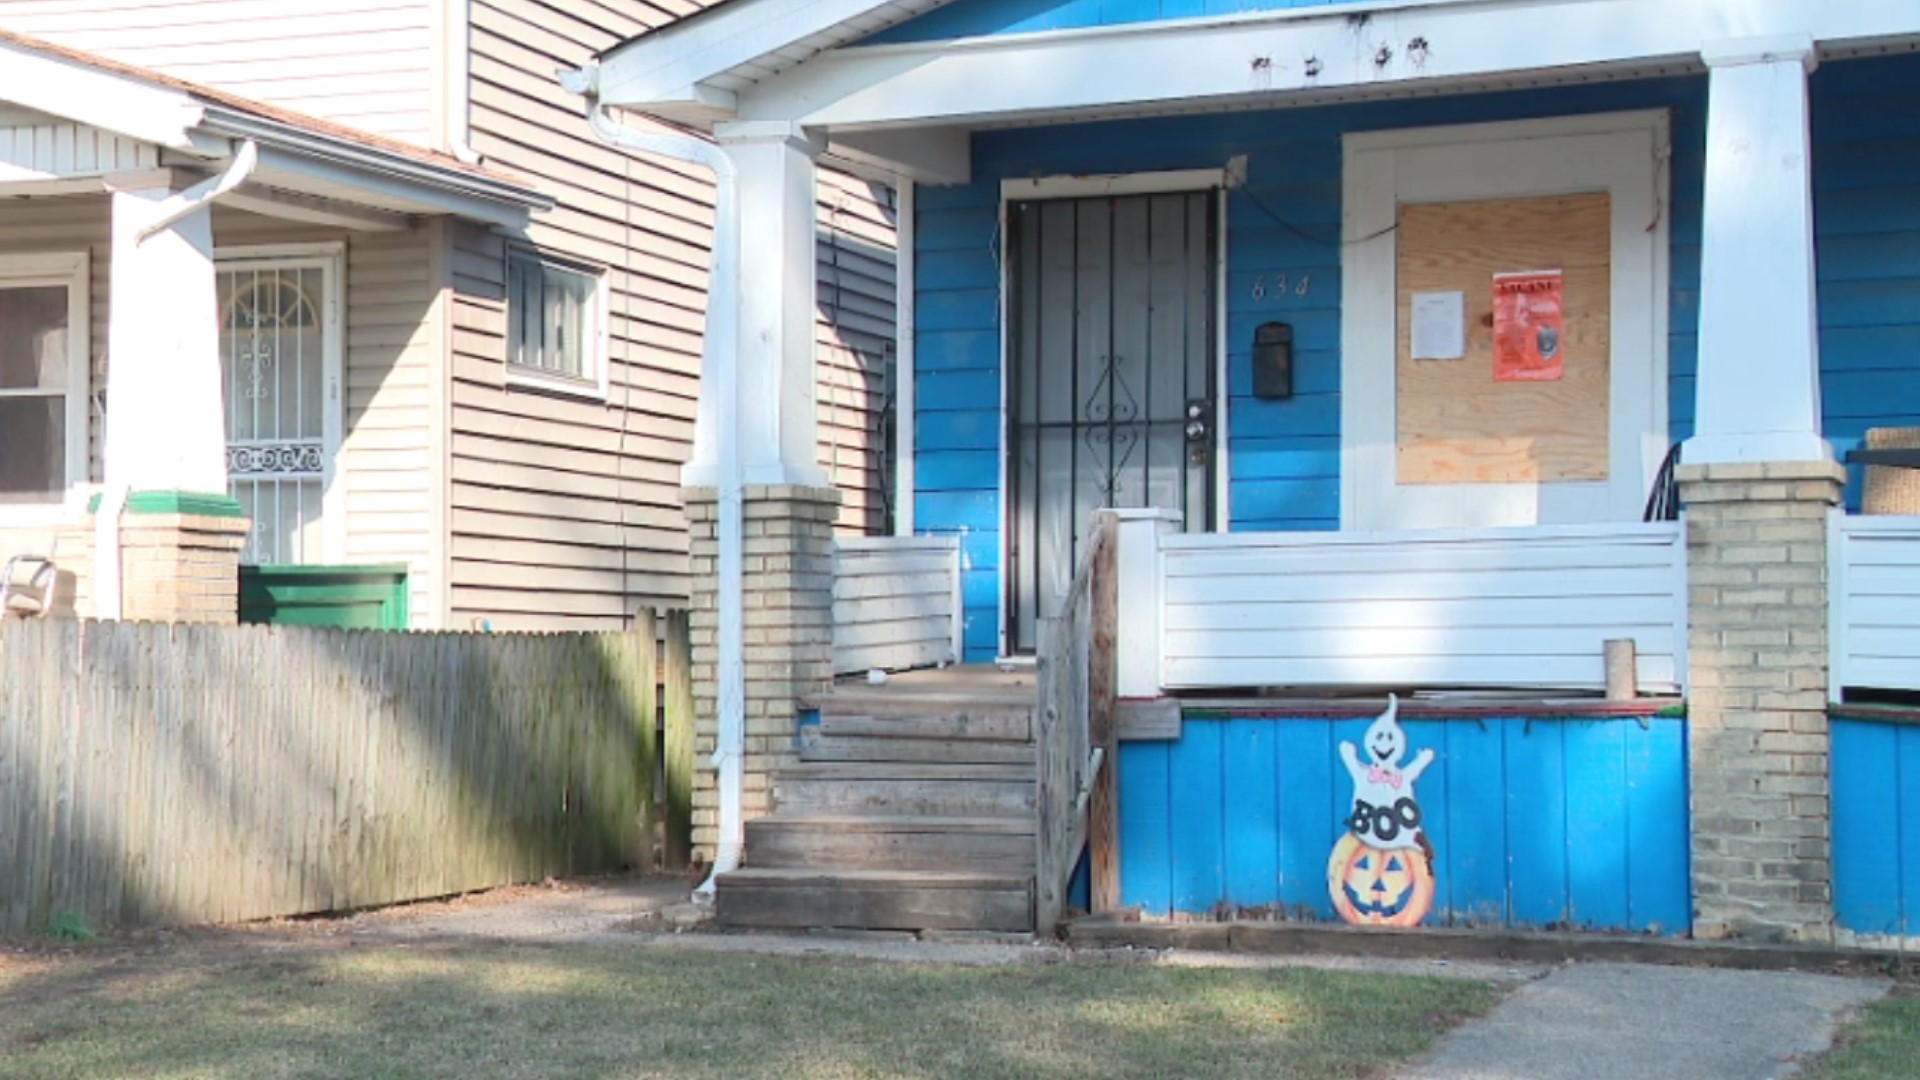 This is the third drug house in the Hilltop to be boarded up within the last month, with two others being closed on Wheatland Avenue and Columbian Avenue.